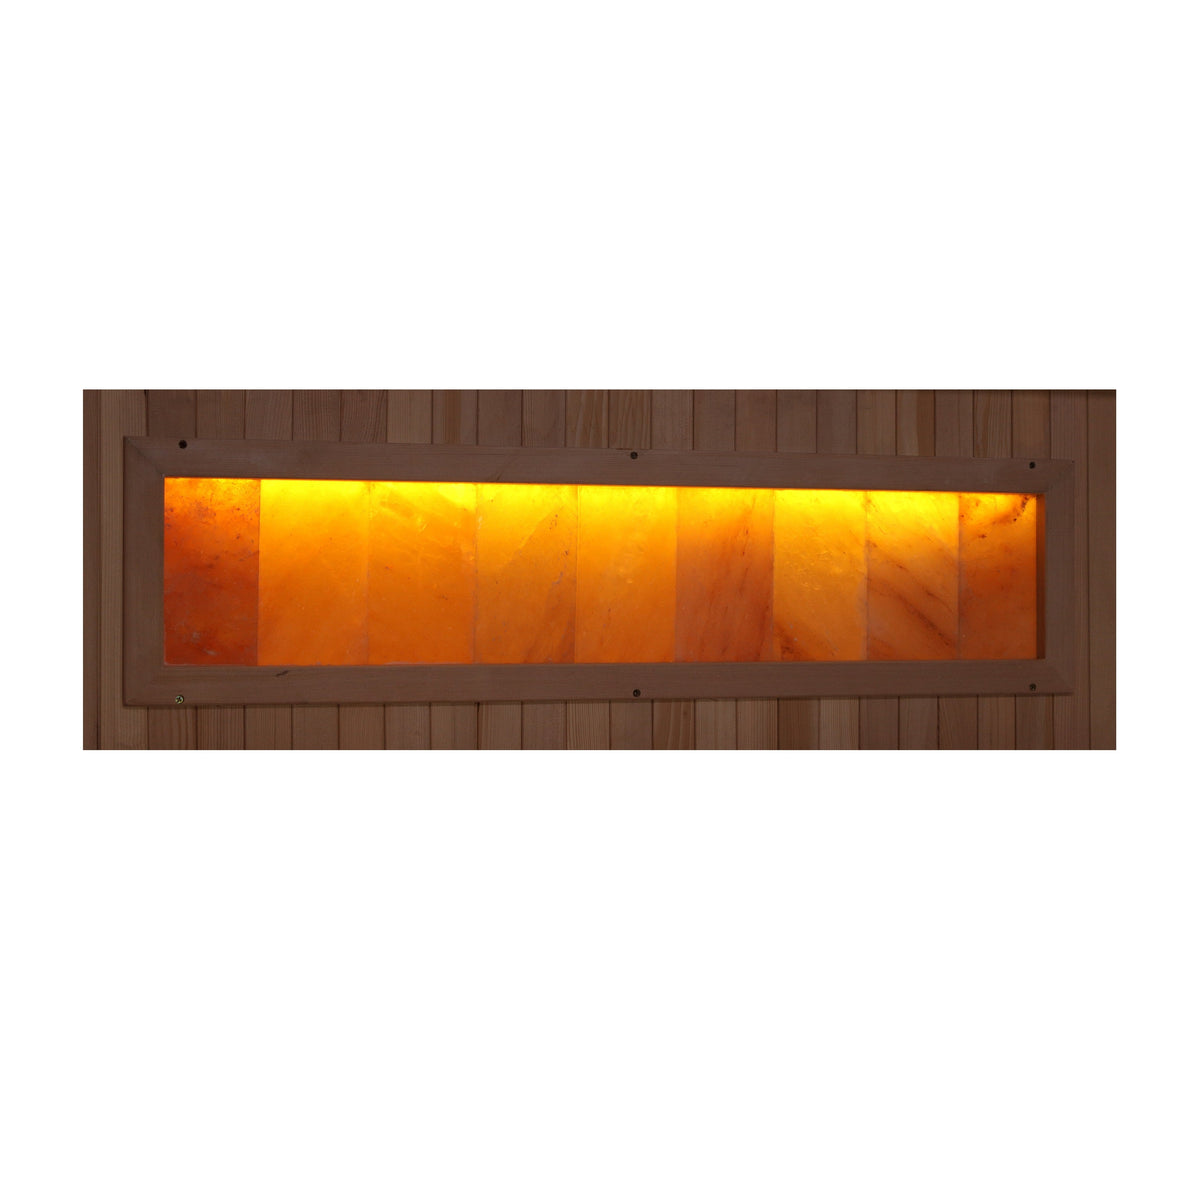 Reserve Edition 3 Person Full Spectrum with HIMALAYAN SALT BAR - $150 DISCOUNT LIMITED OFFER  - IN STOCK